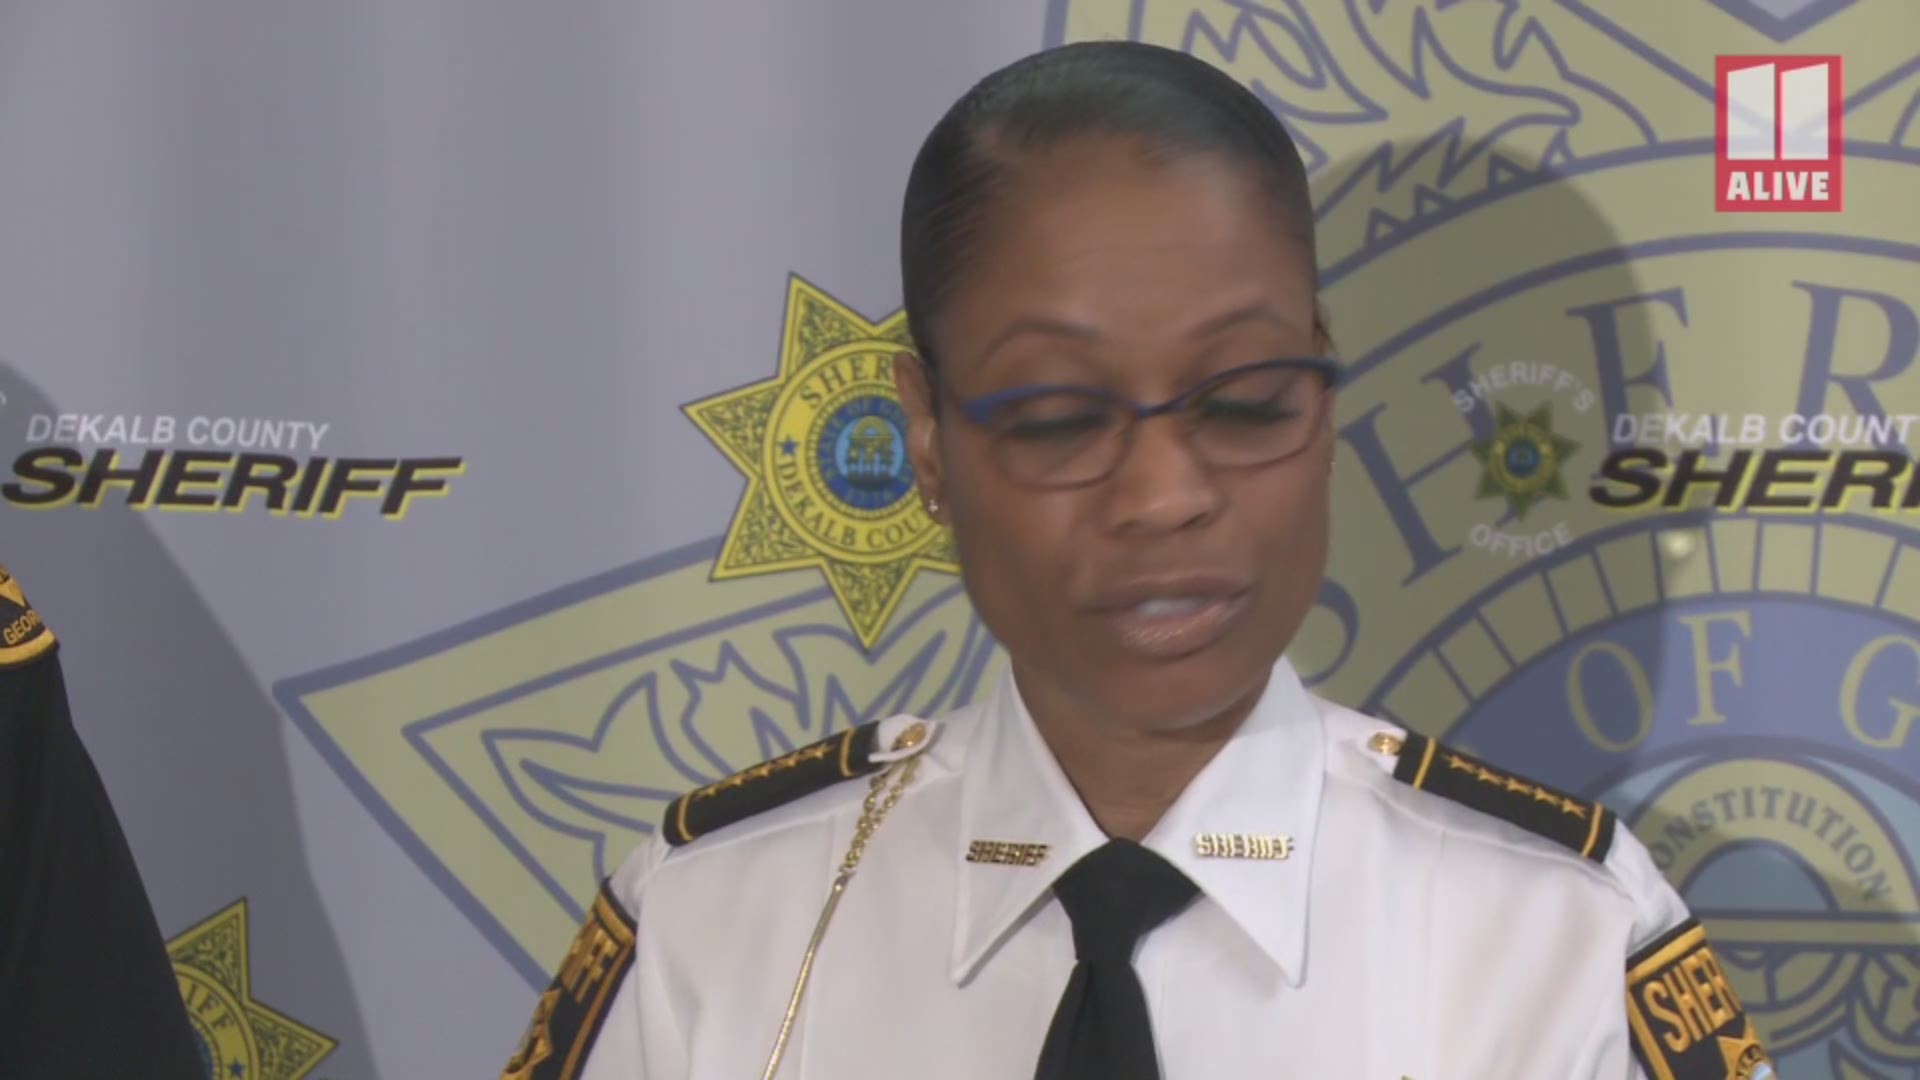 We are prepared and well-equipped to handle any medical crisis that may arise inside this facility," said DeKalb Sheriff Melody Maddox on Wednesday.